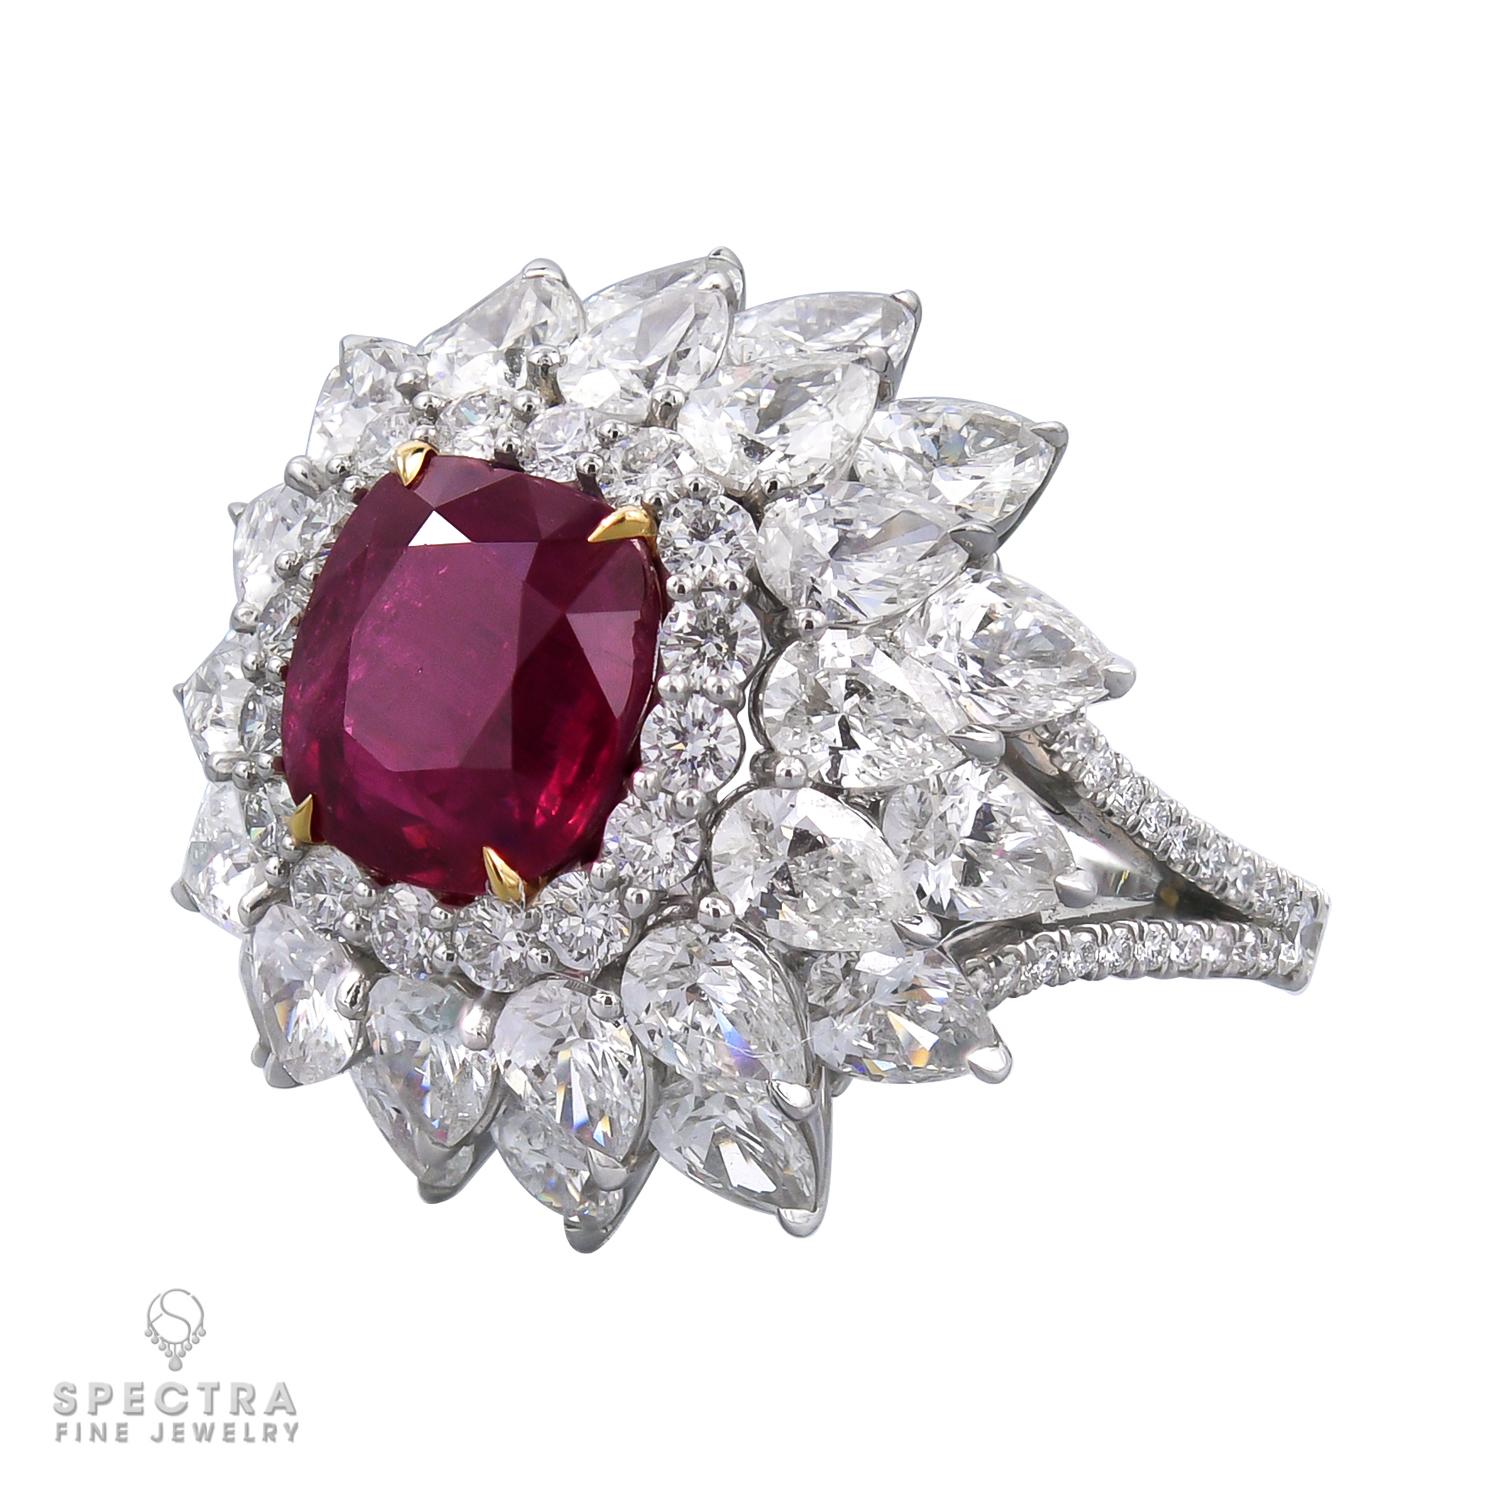 A cocktail ring featuring a cushion ruby in the center and surrounded by diamonds.
The ruby is certified by AGTA lab, stating that the origin is East Africa with the indication of minor heating.
28 pear shape diamonds weighing a total of 7.05